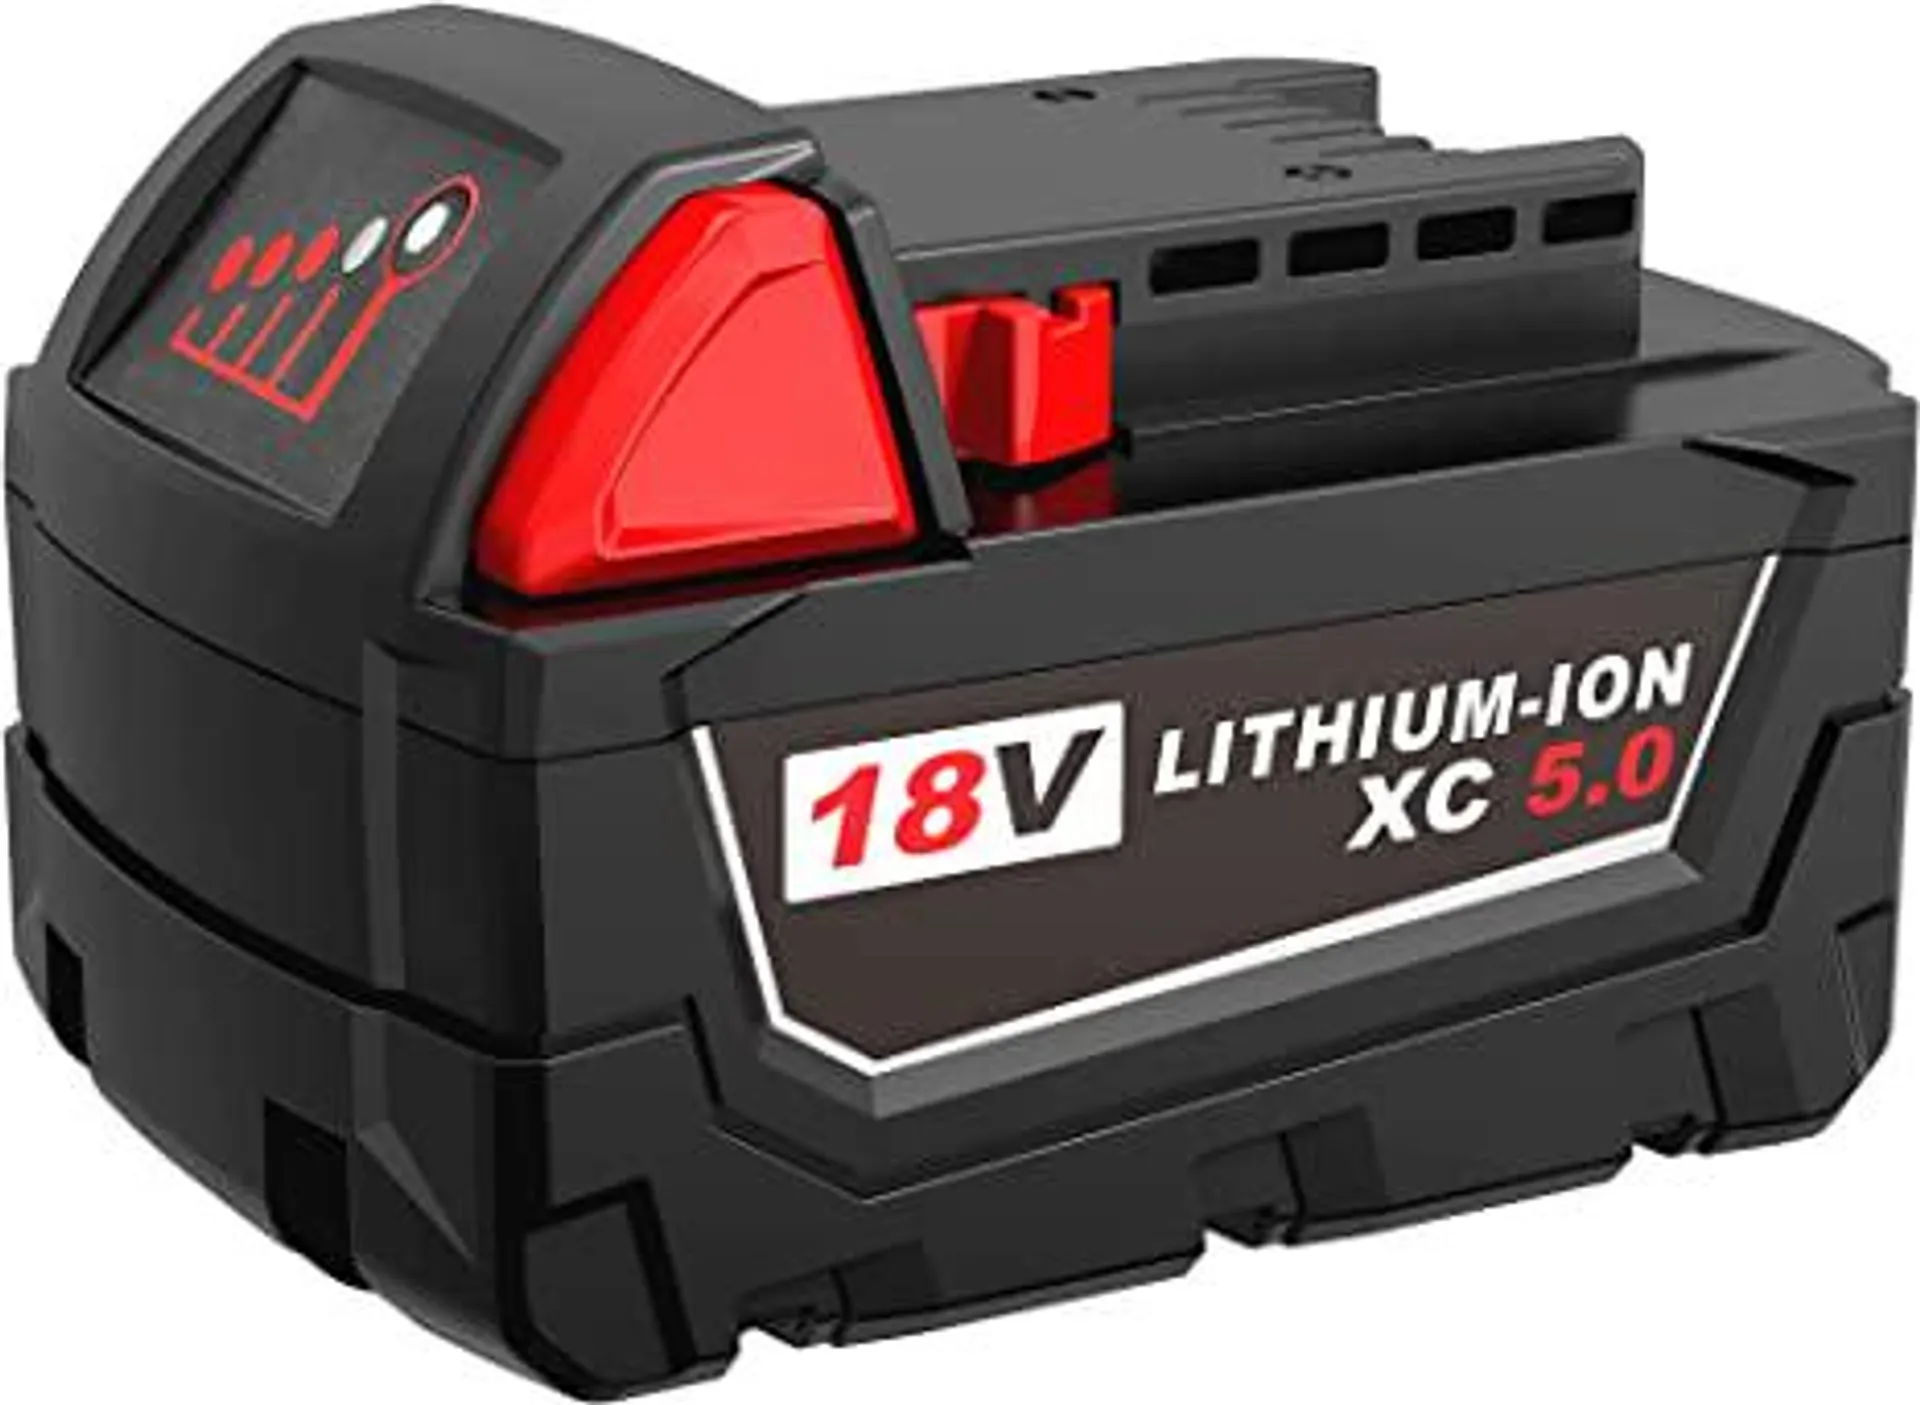 BULL-TECH 18V 48-11-1850 5.0 AH for Milwaukee m18 Battery,Compatible with All Power 18V Milwaukee Power+ Tools